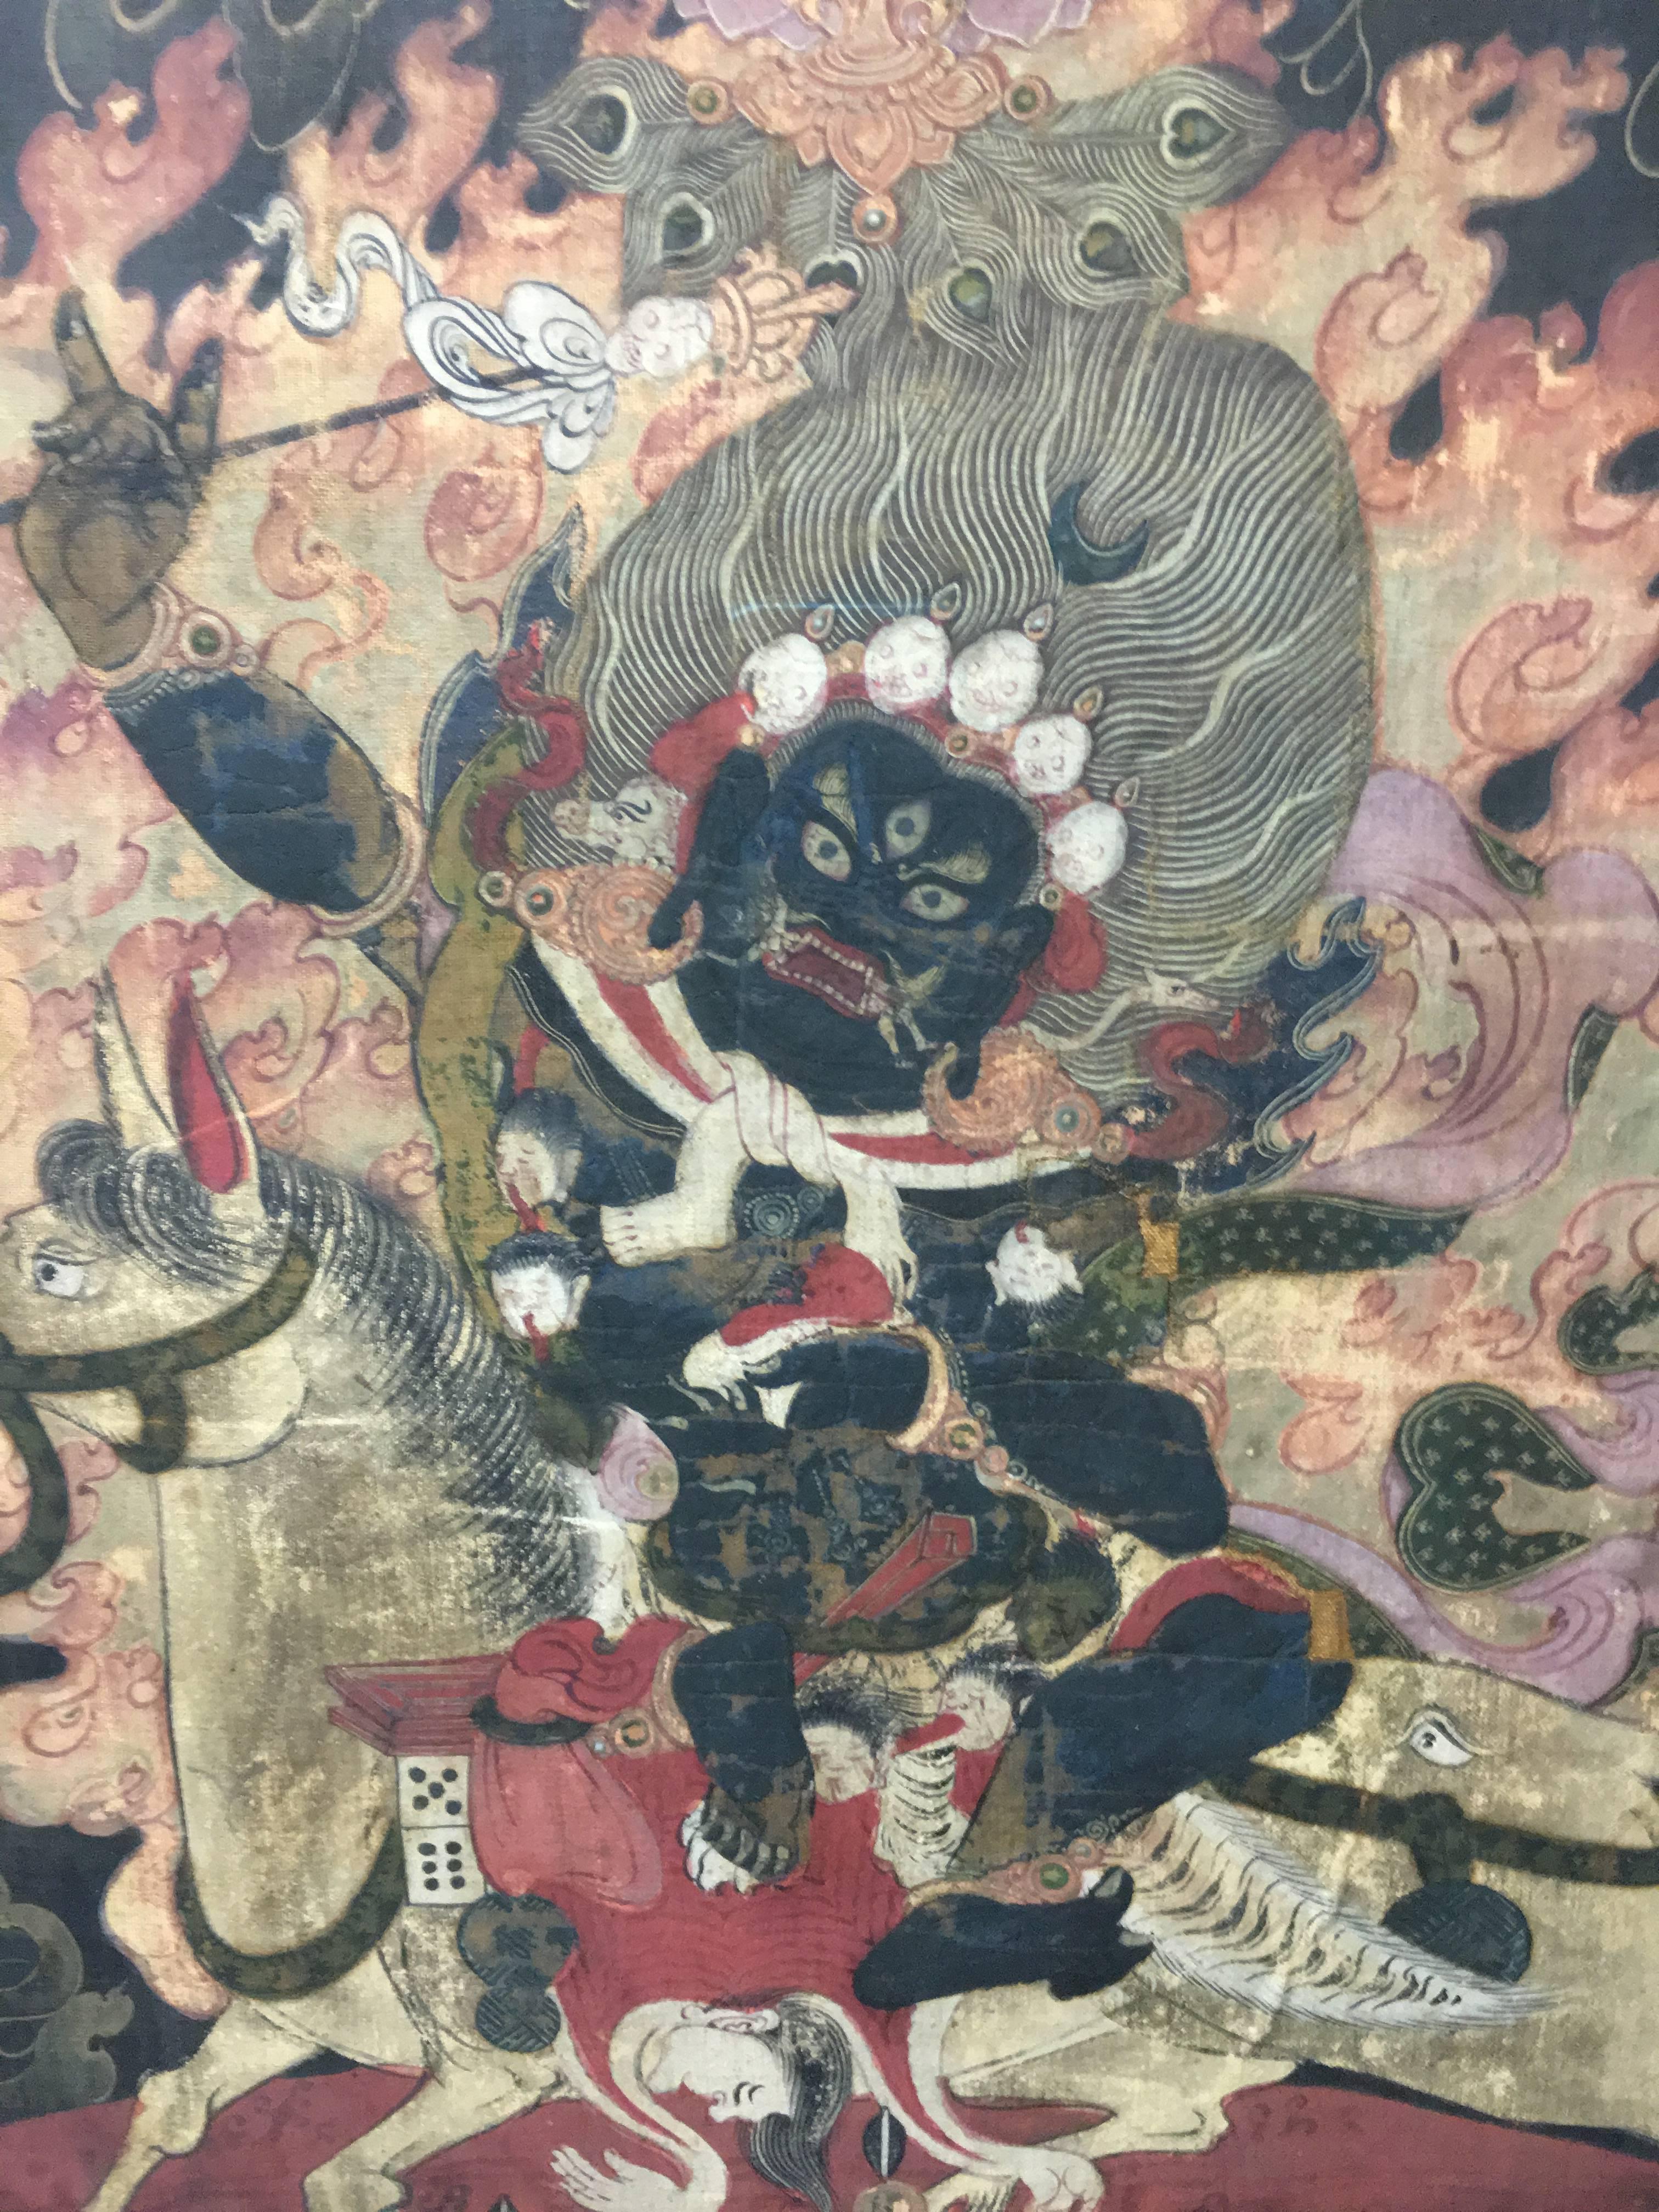 A painting of Shri Devi Magzor Gyalmo Tibet, 18th century.
The blue skinned goddess seated on her mule, holding a skull cup and an incense stick aloft, wearing various skull garlands and animal heads.
Measures: 50